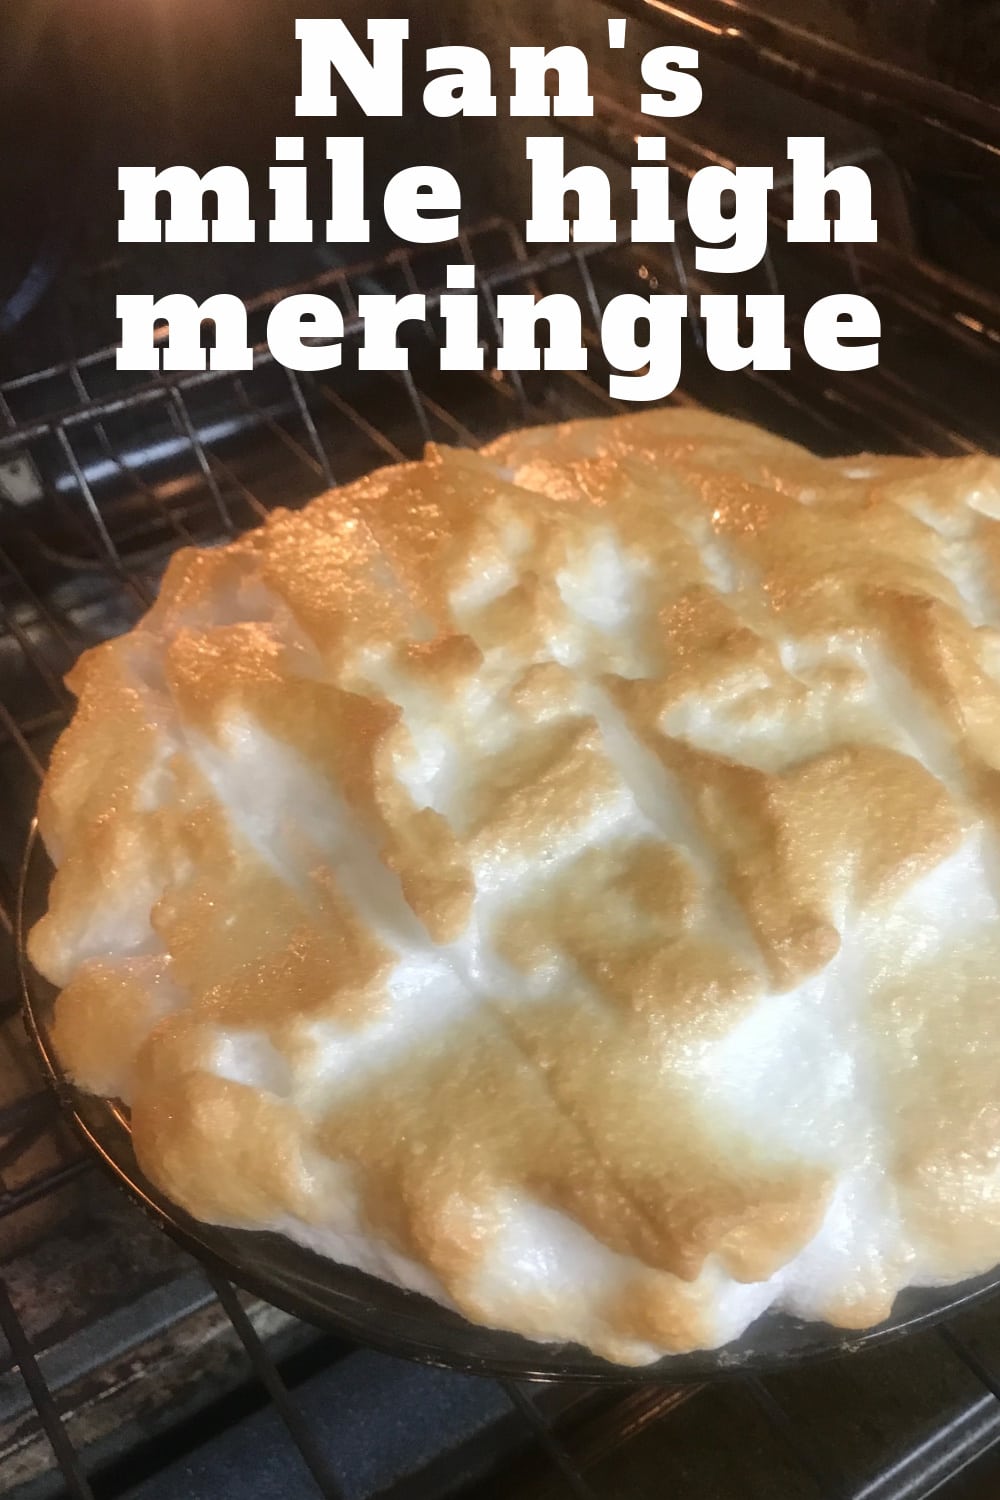 A beautiful lemon meringue pie being removed from the oven.